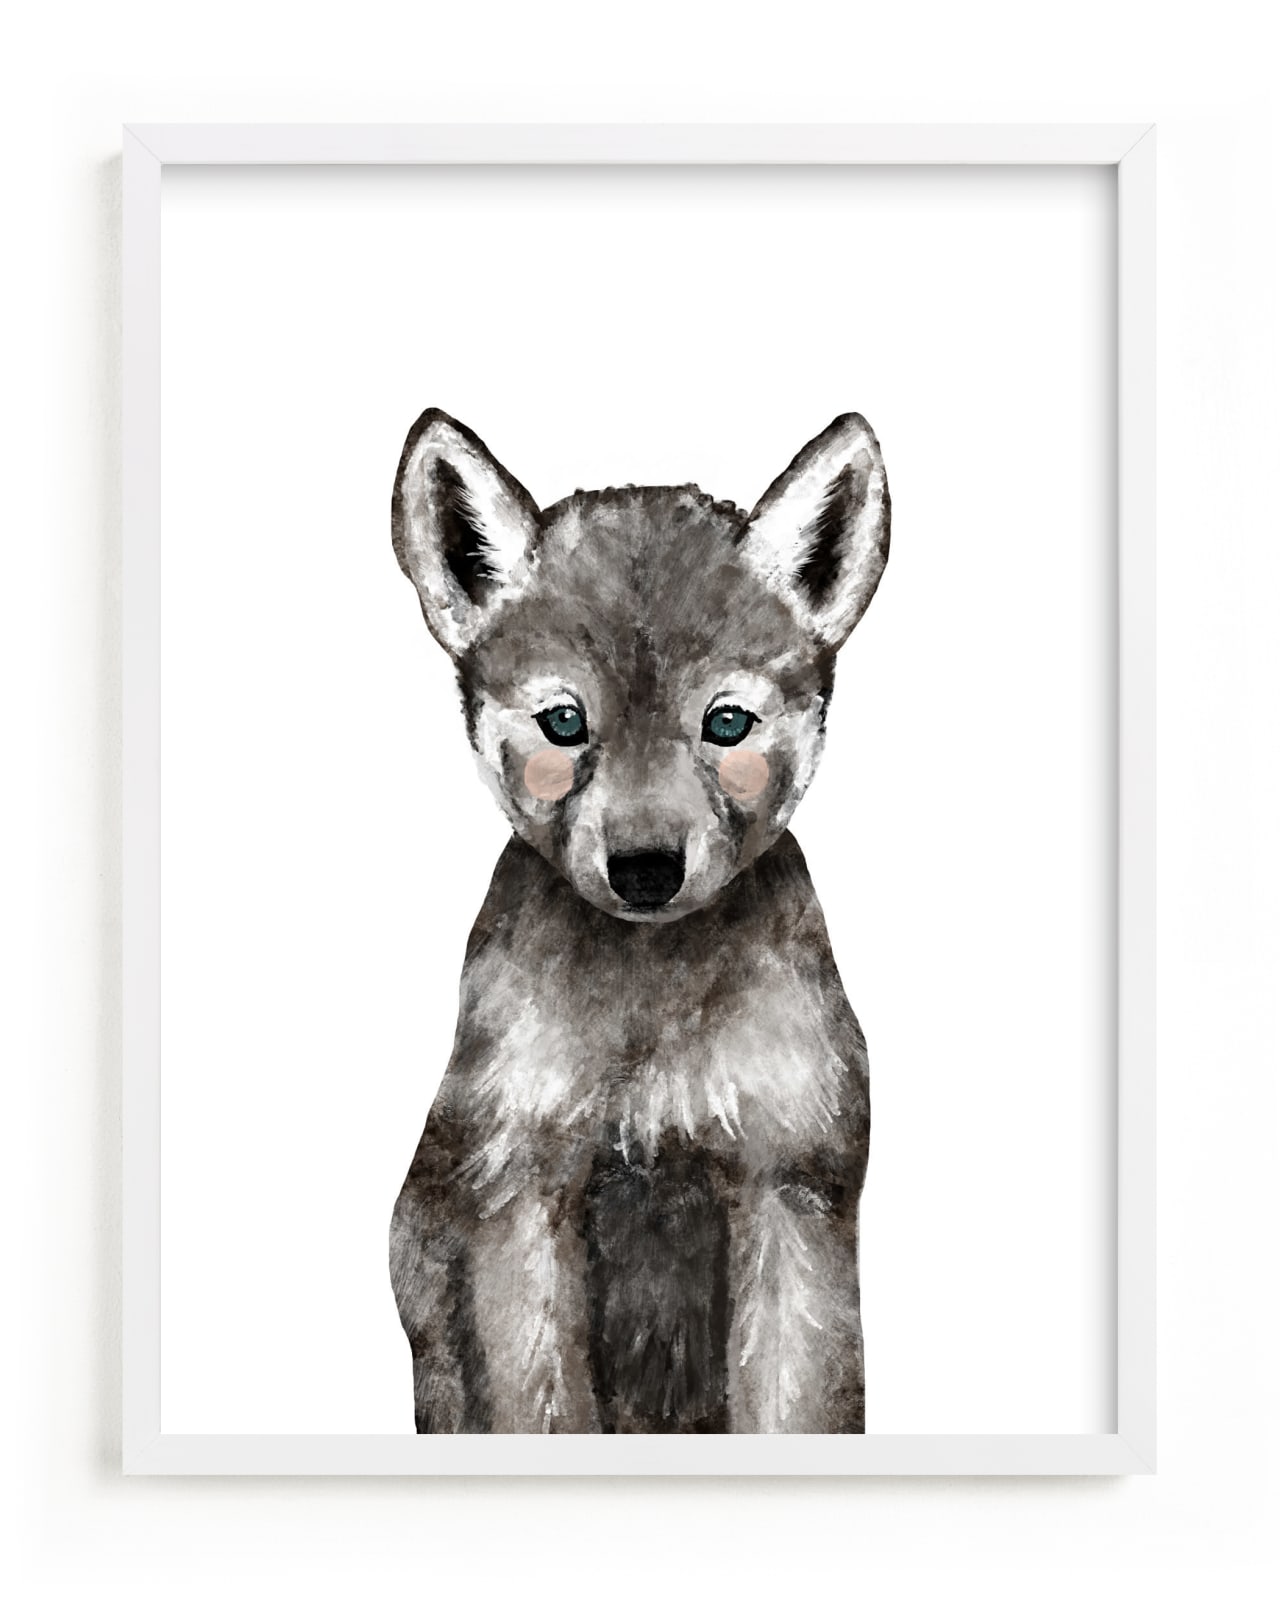 This is a brown kids wall art by Cass Loh called Baby Animal Wolf.